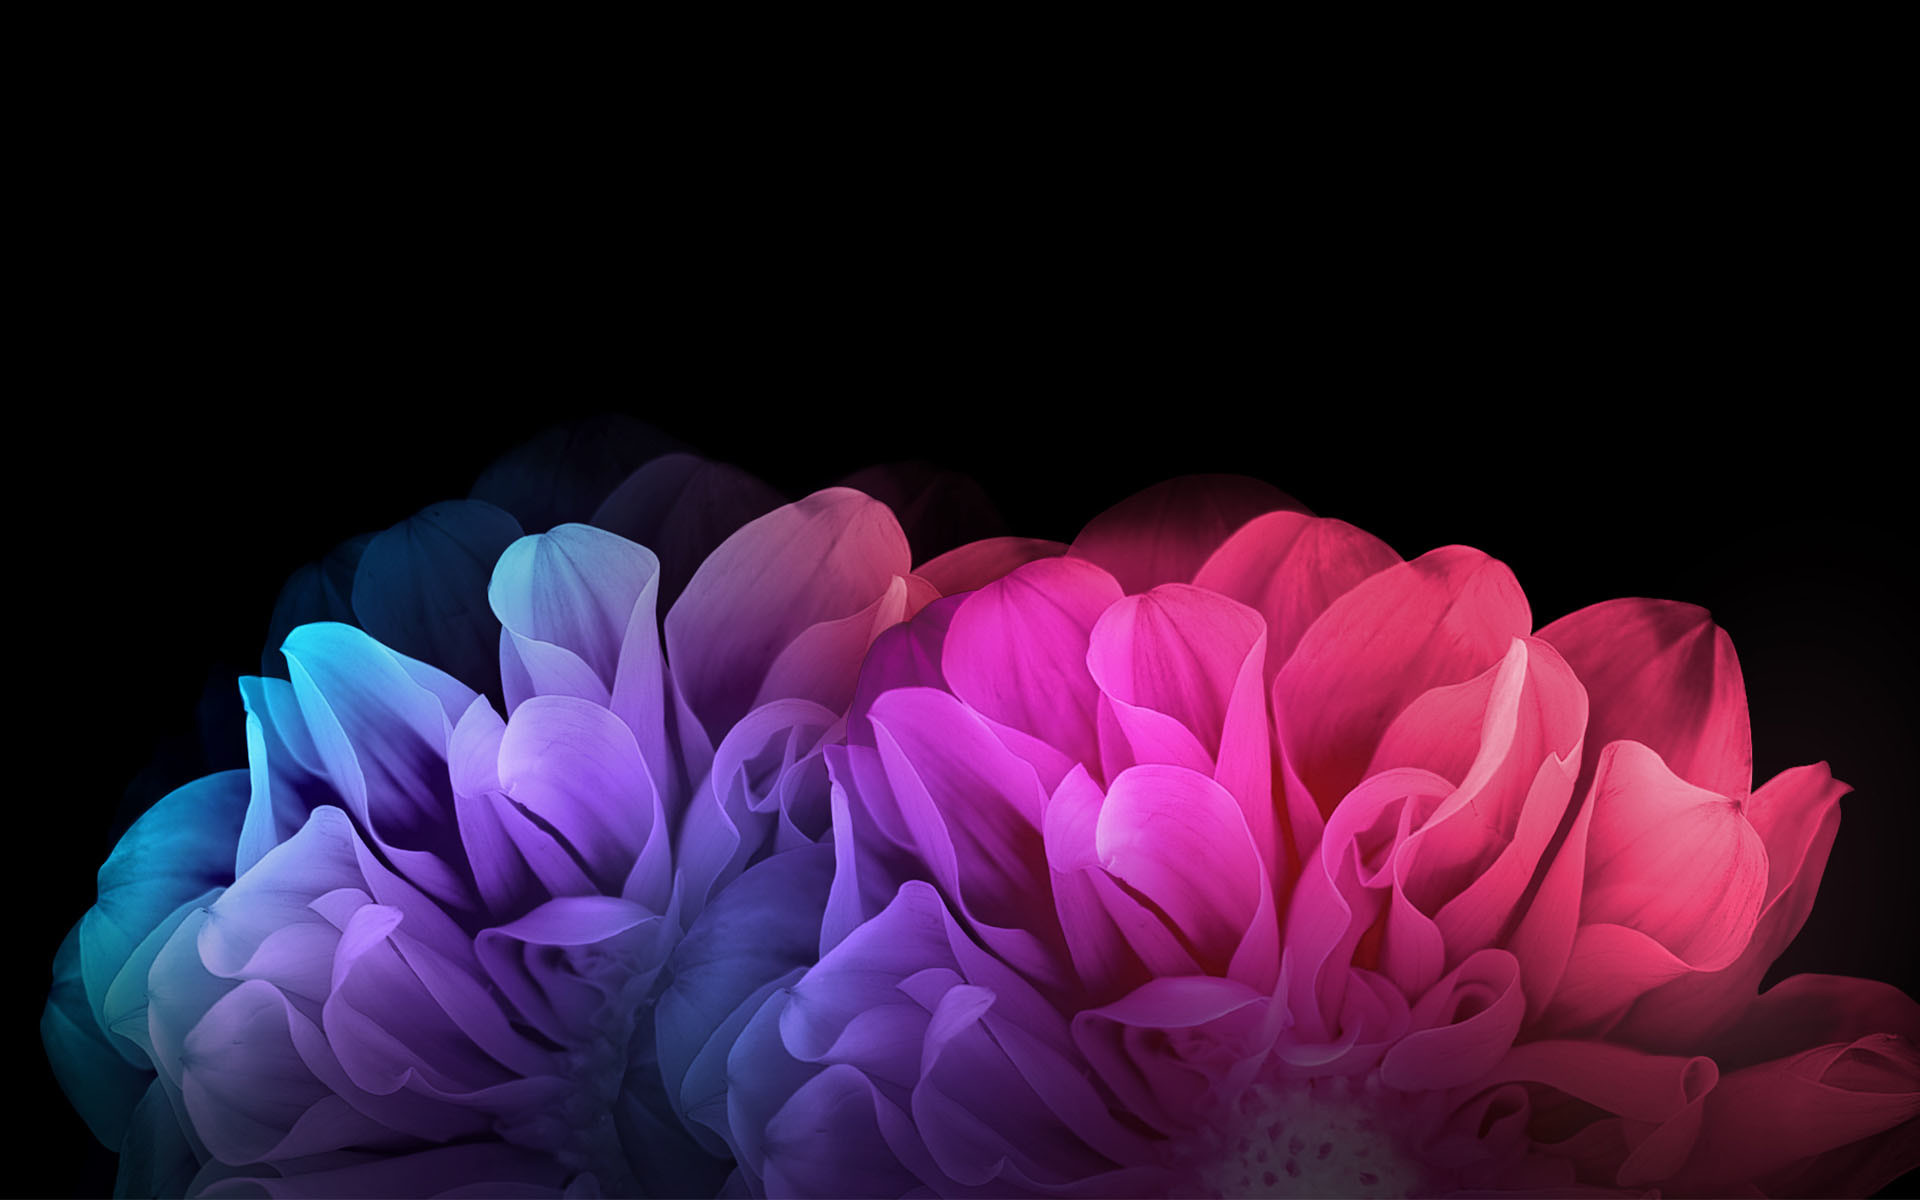 Nice colorful flowers with black background hd wallpaper for desktop